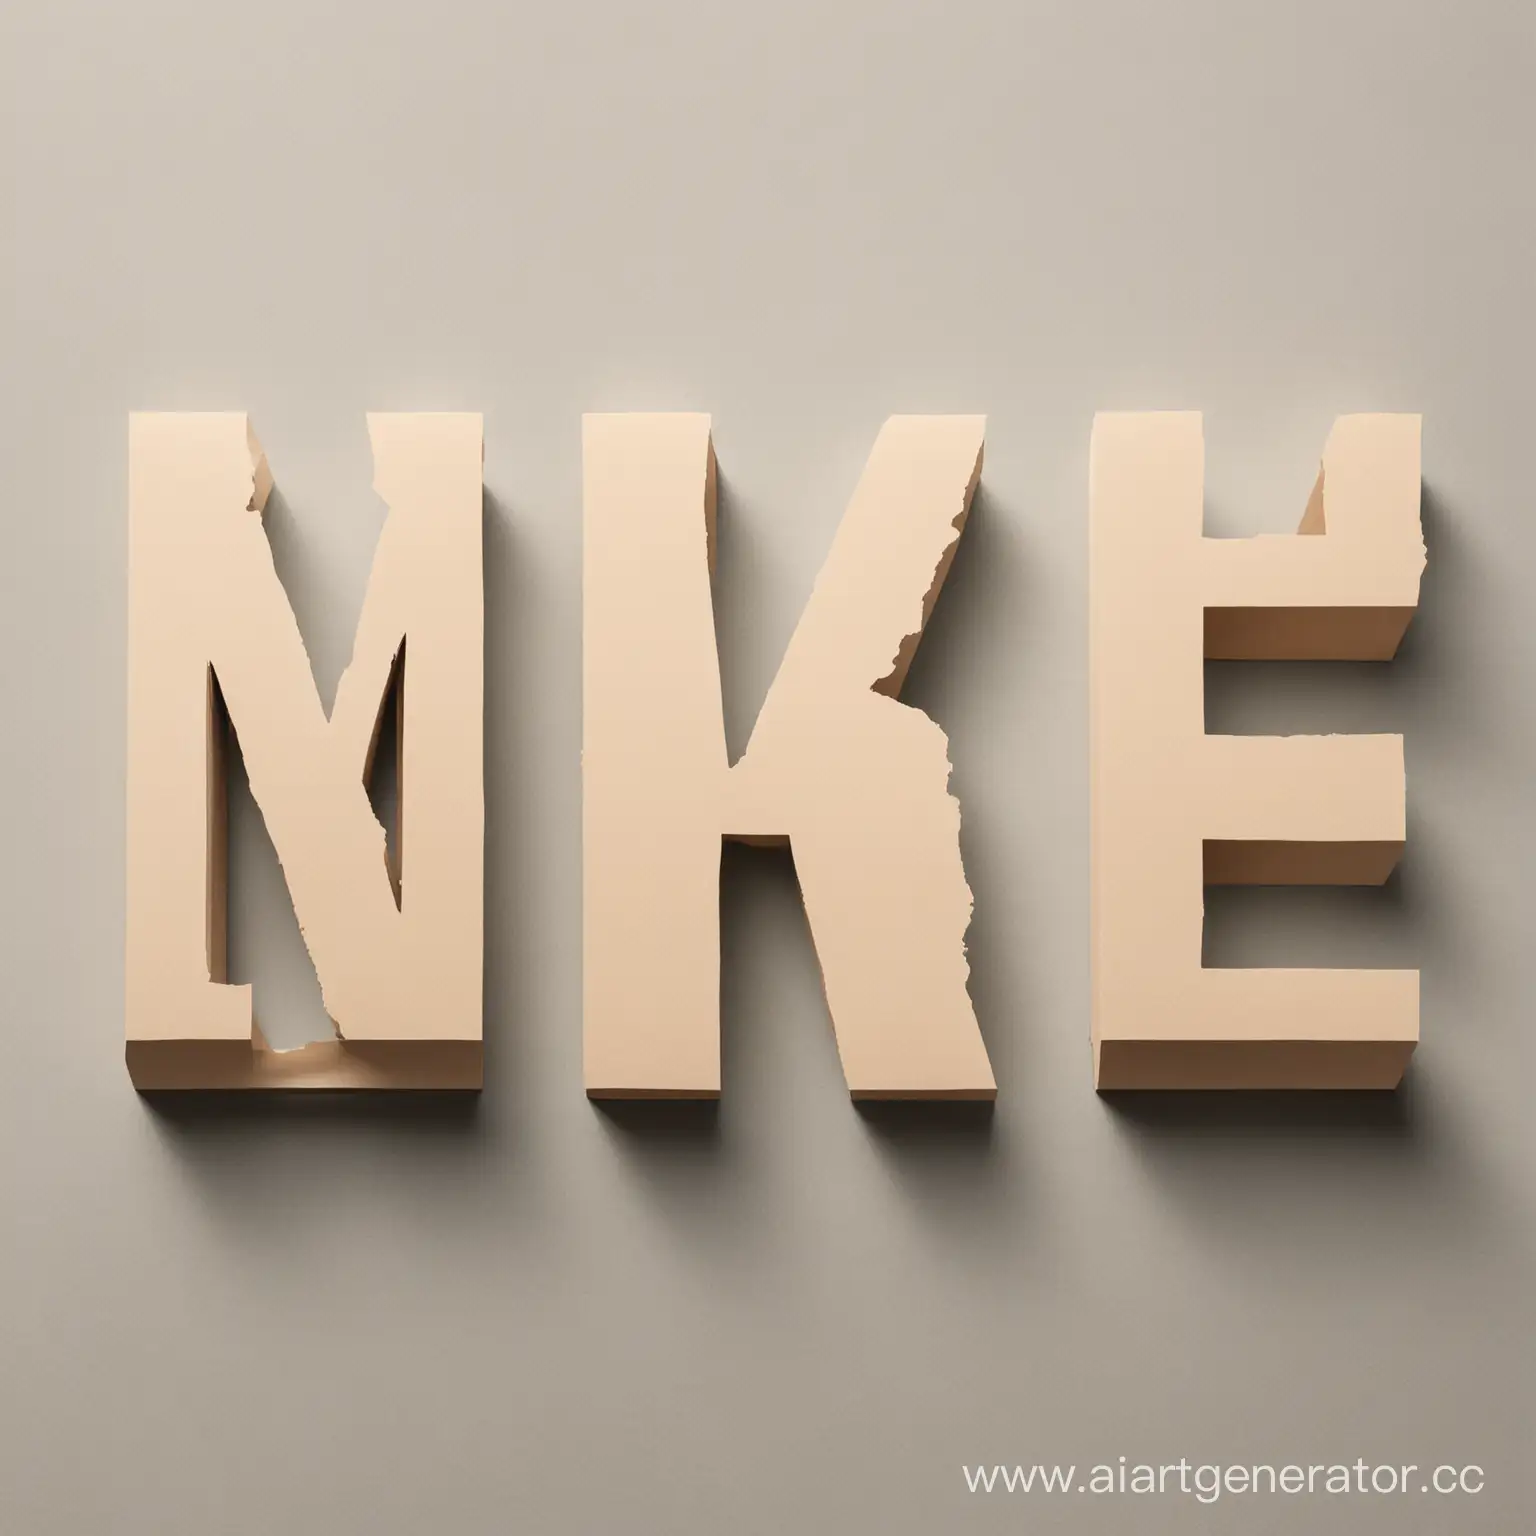 make perspective letters on a plain background.
The letters should be clear,